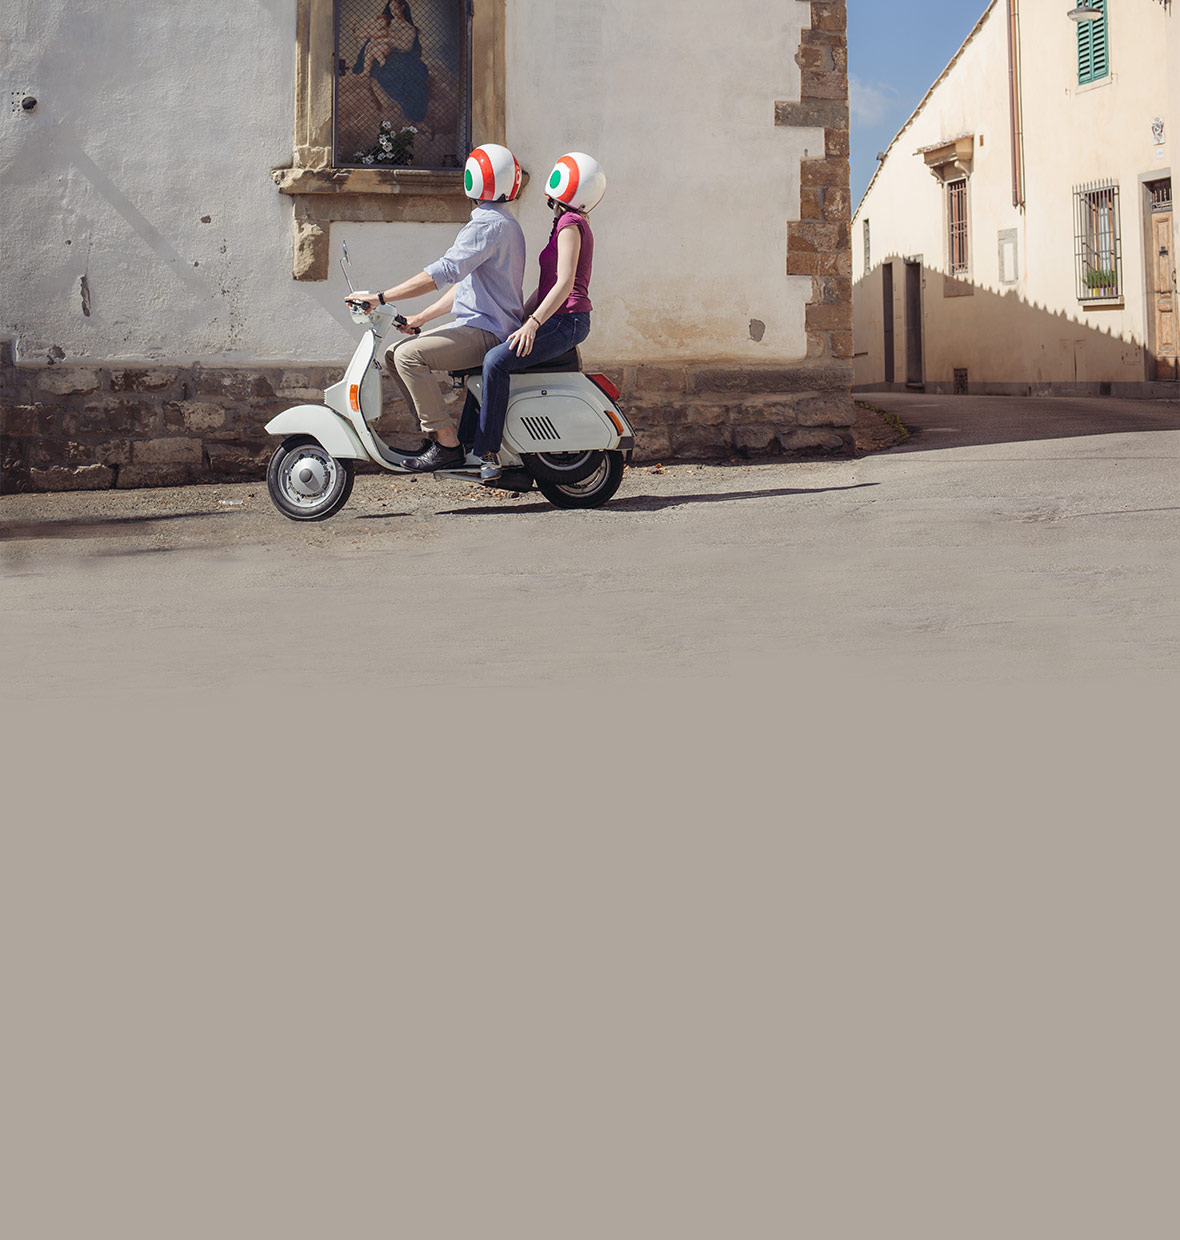 Couple travelling on a scooter